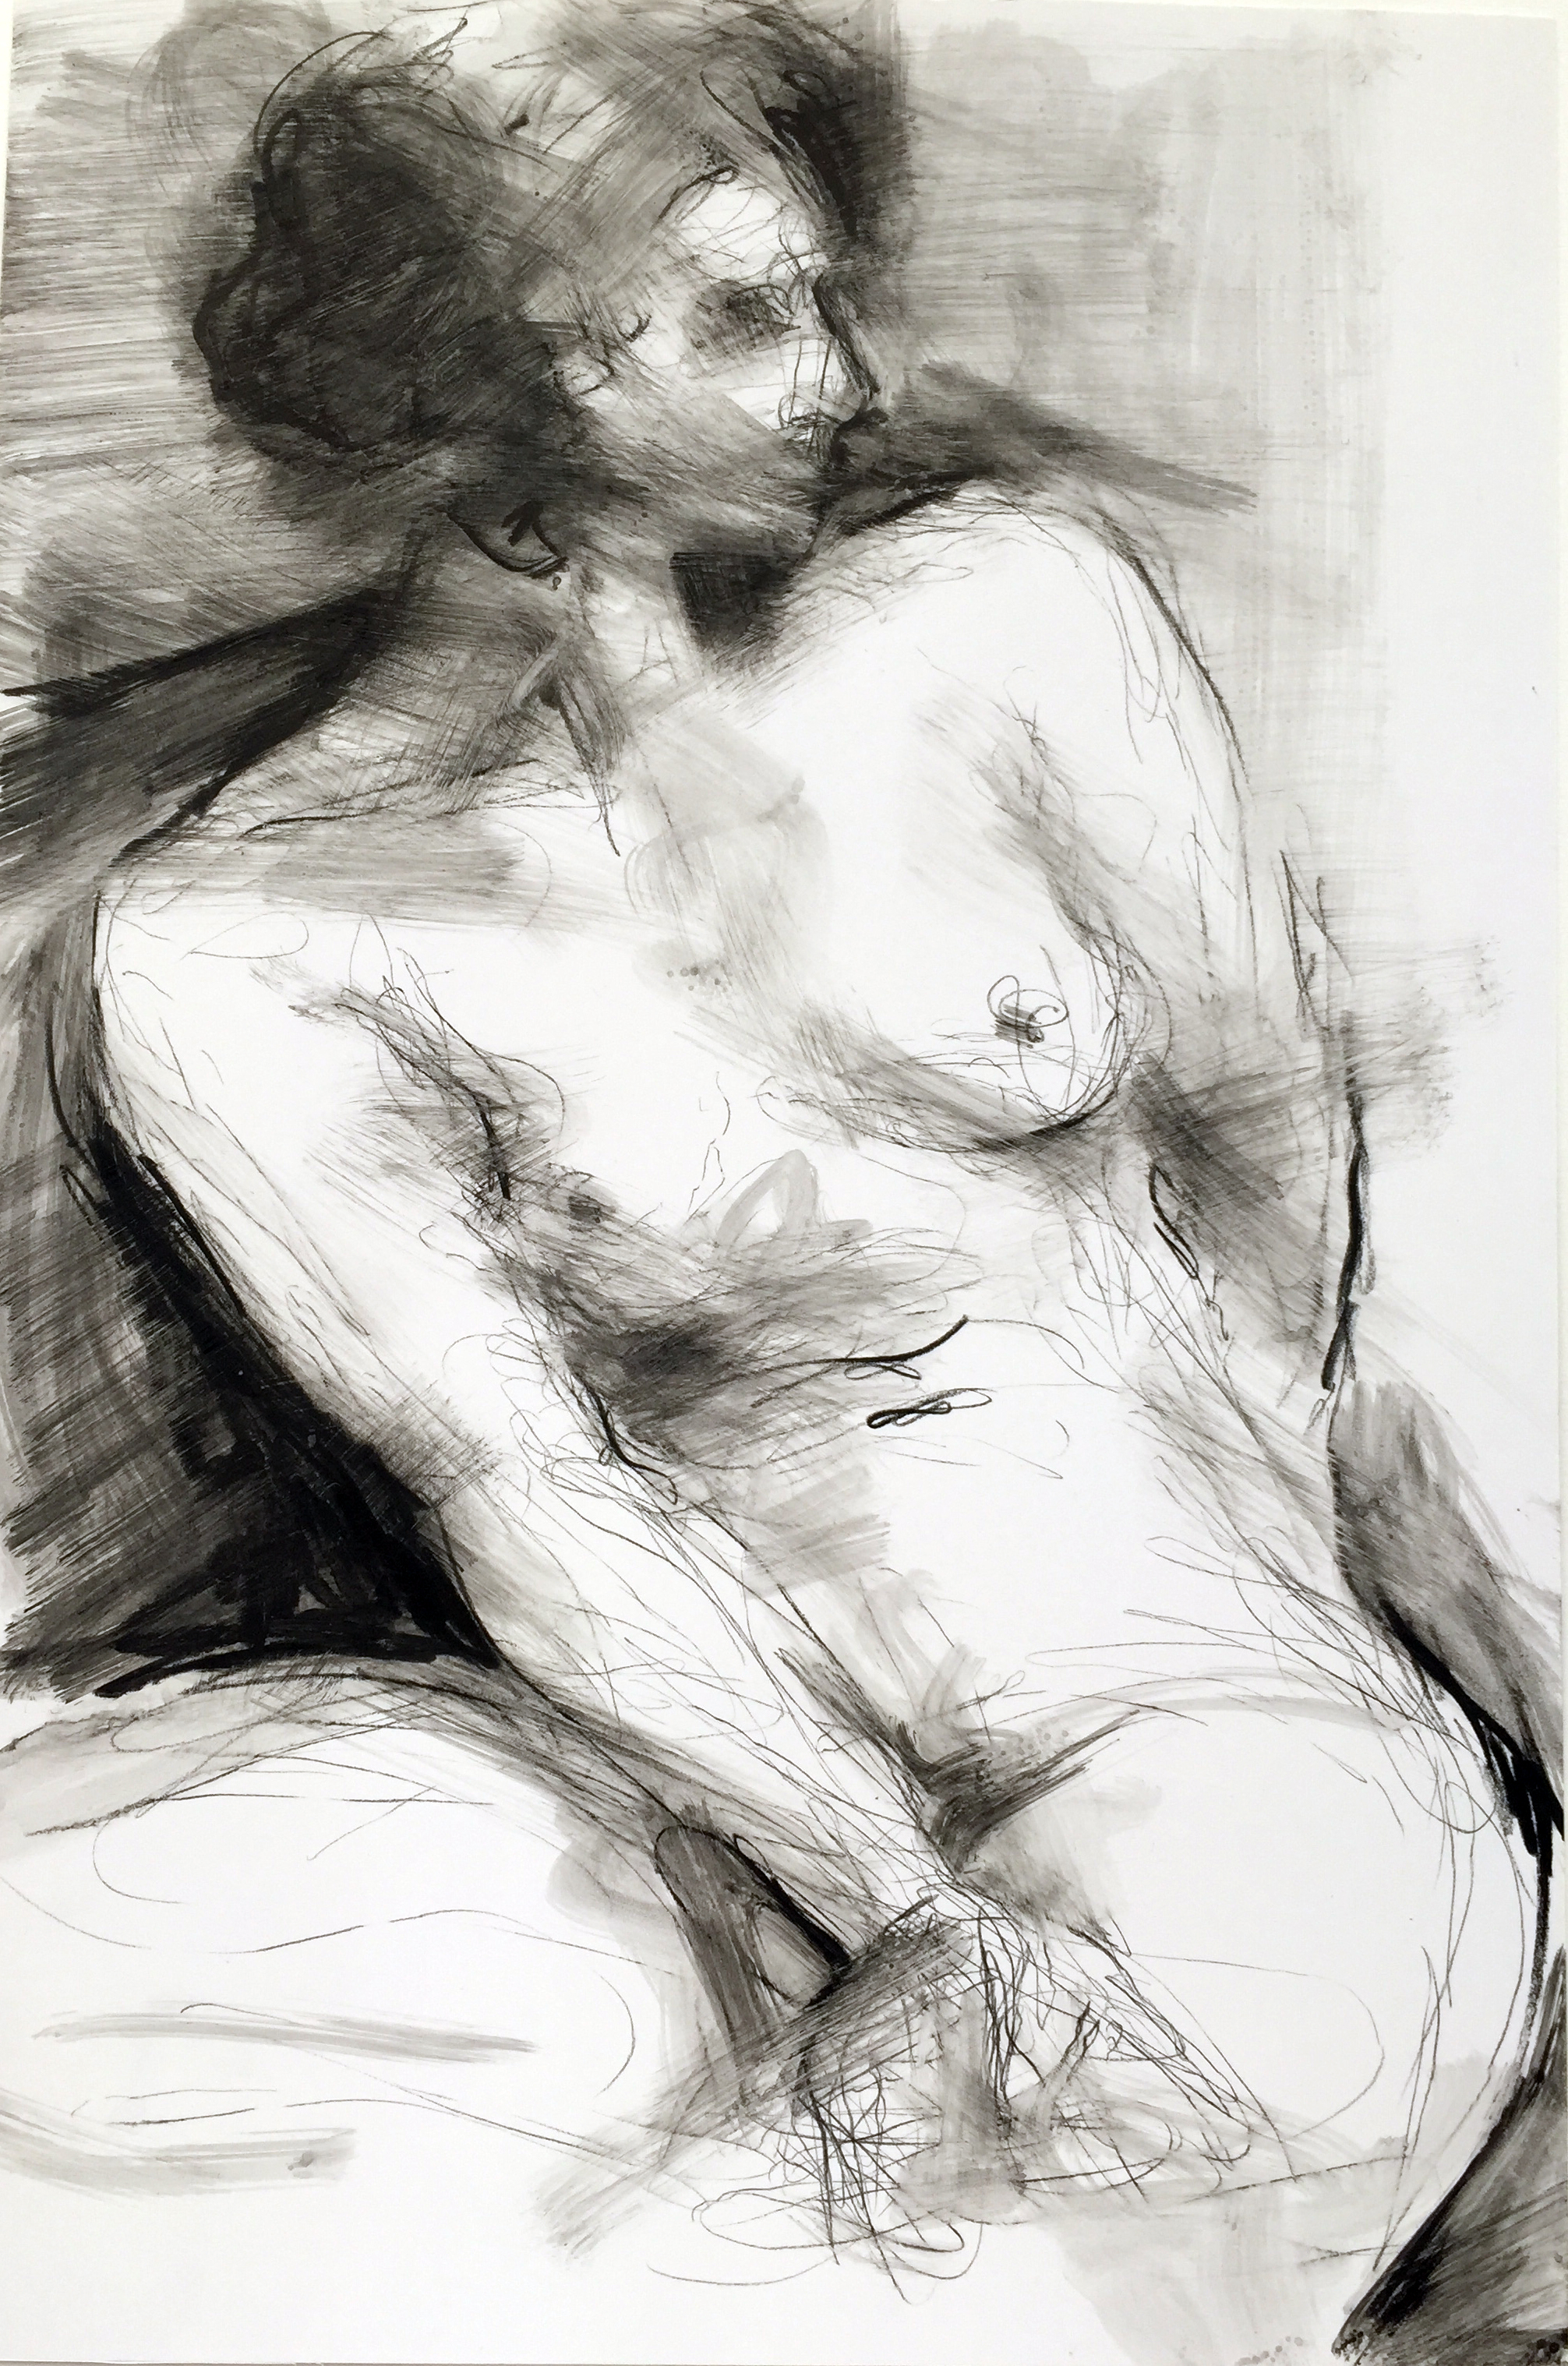   Nude 26  2016 Watercrayon on paper 18" x 12" 